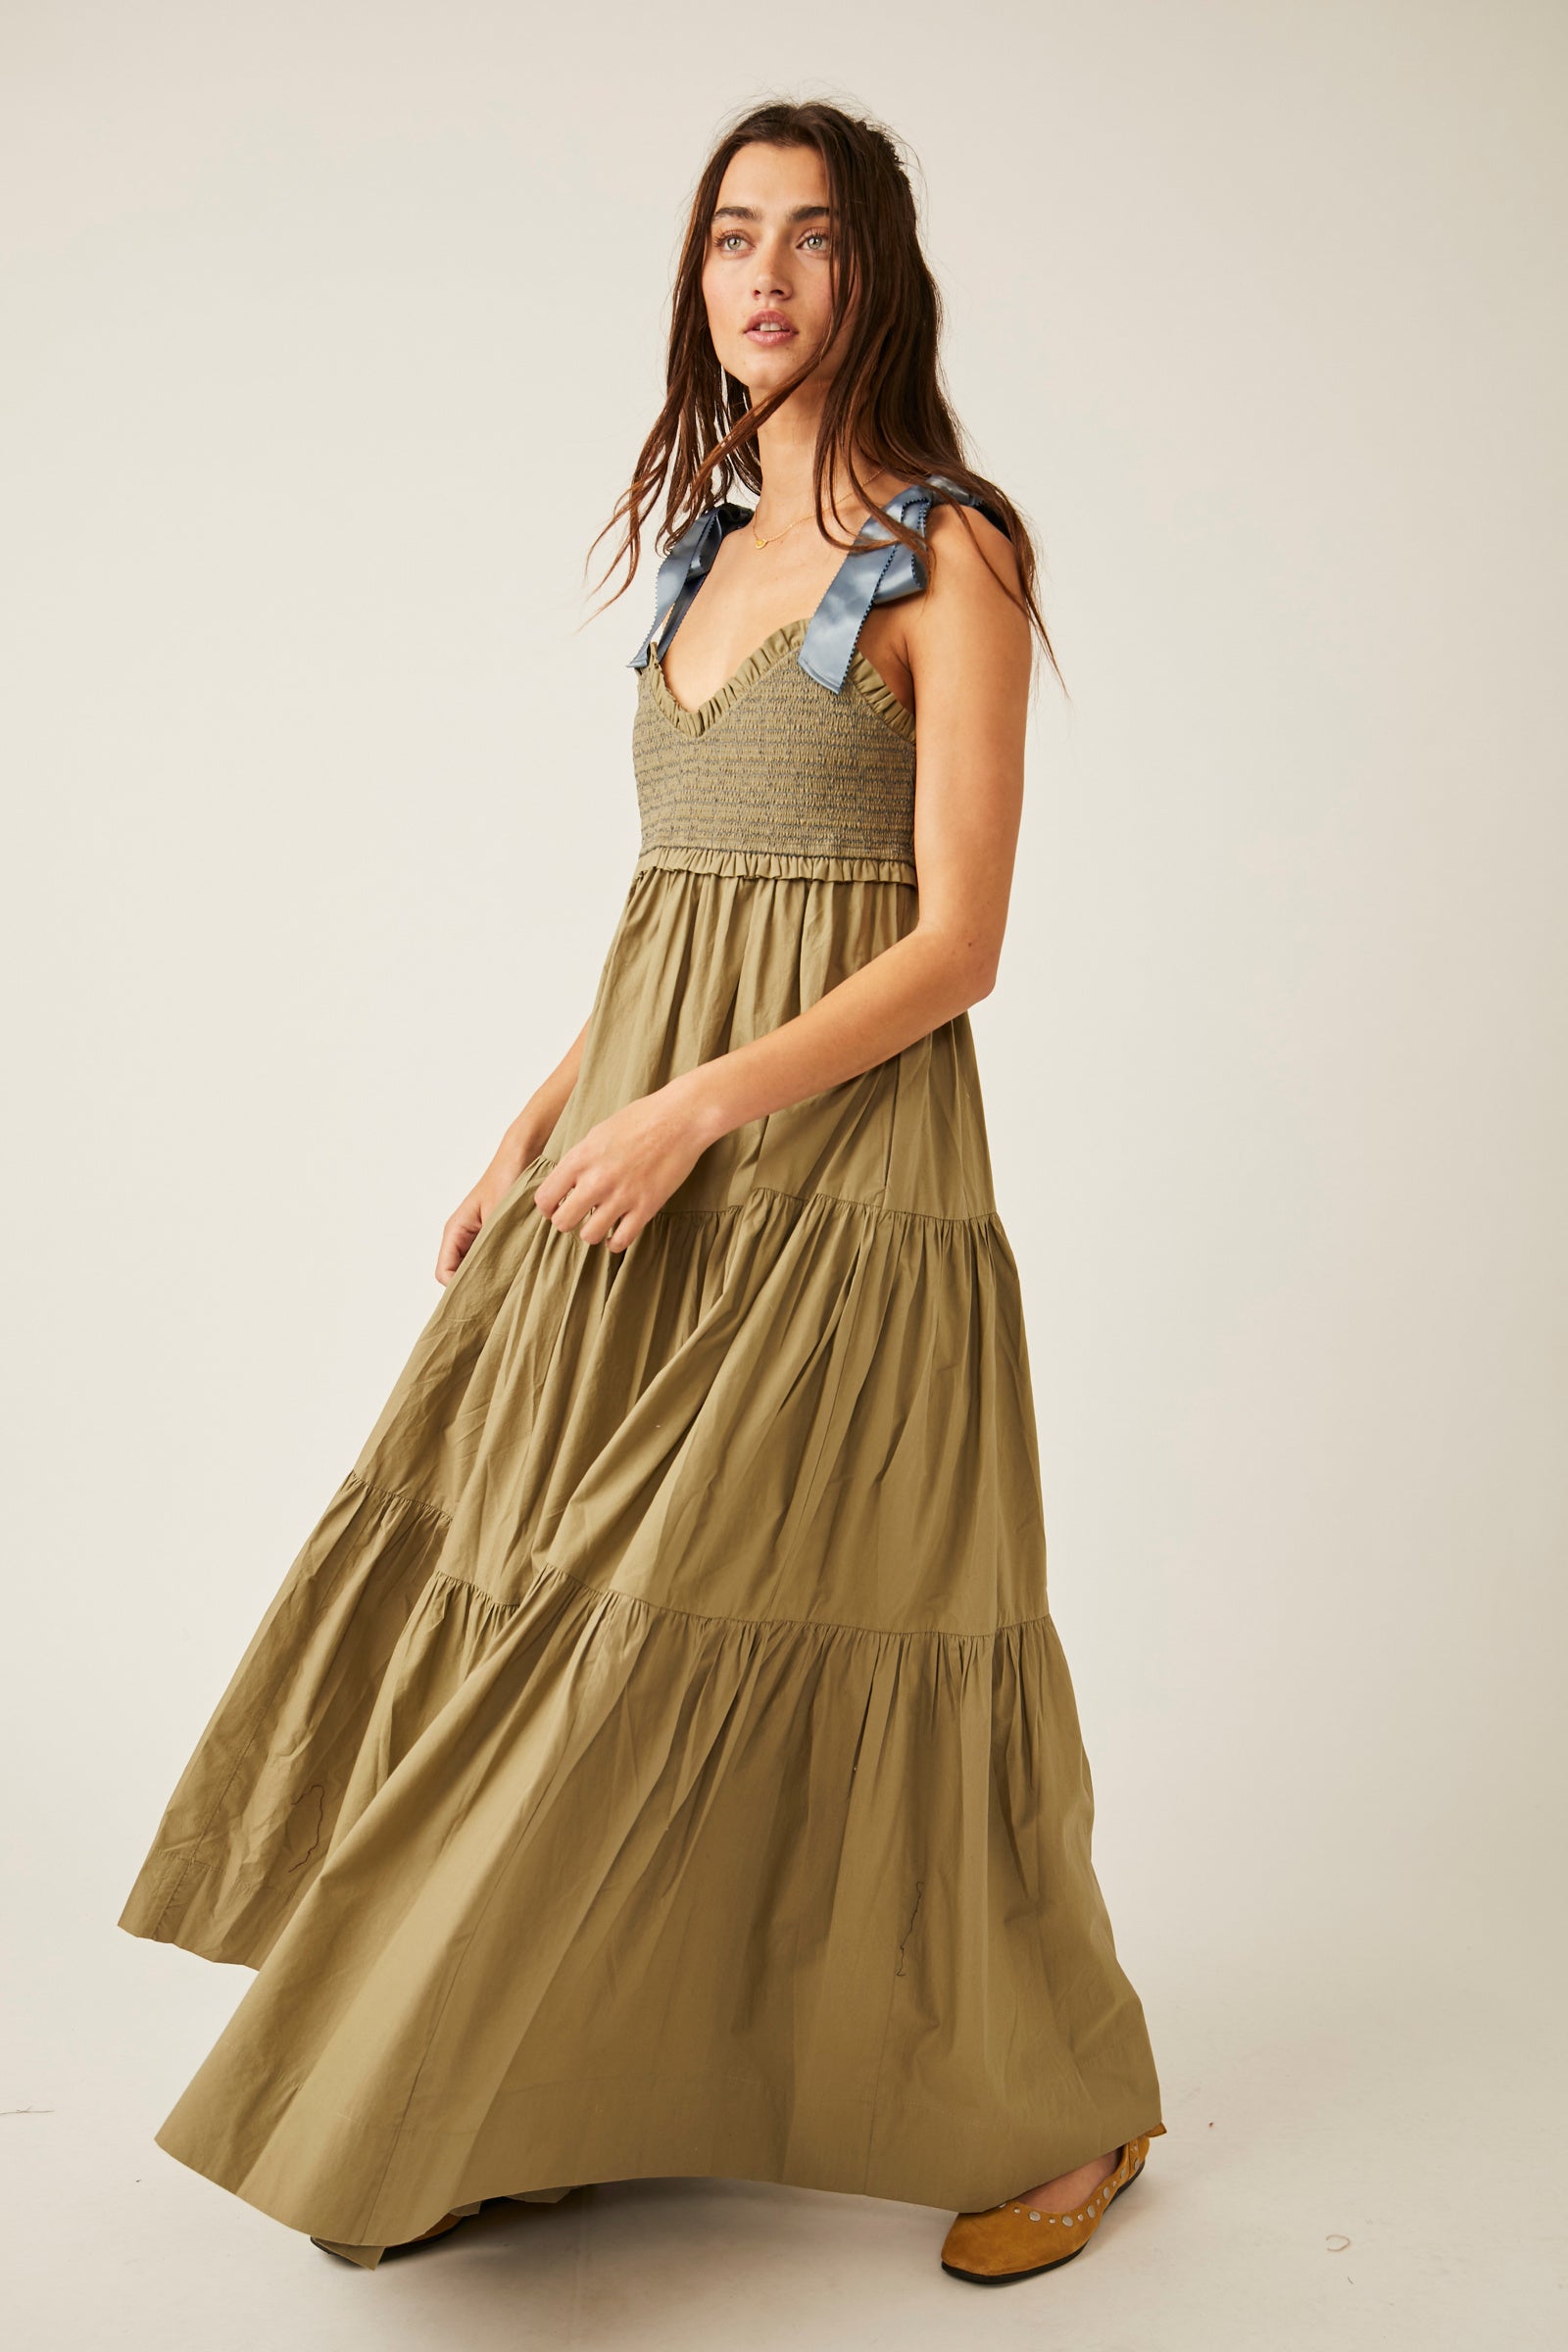 FREE PEOPLE BLUEBELL SOLID MAXI DRESS IN SERPENT